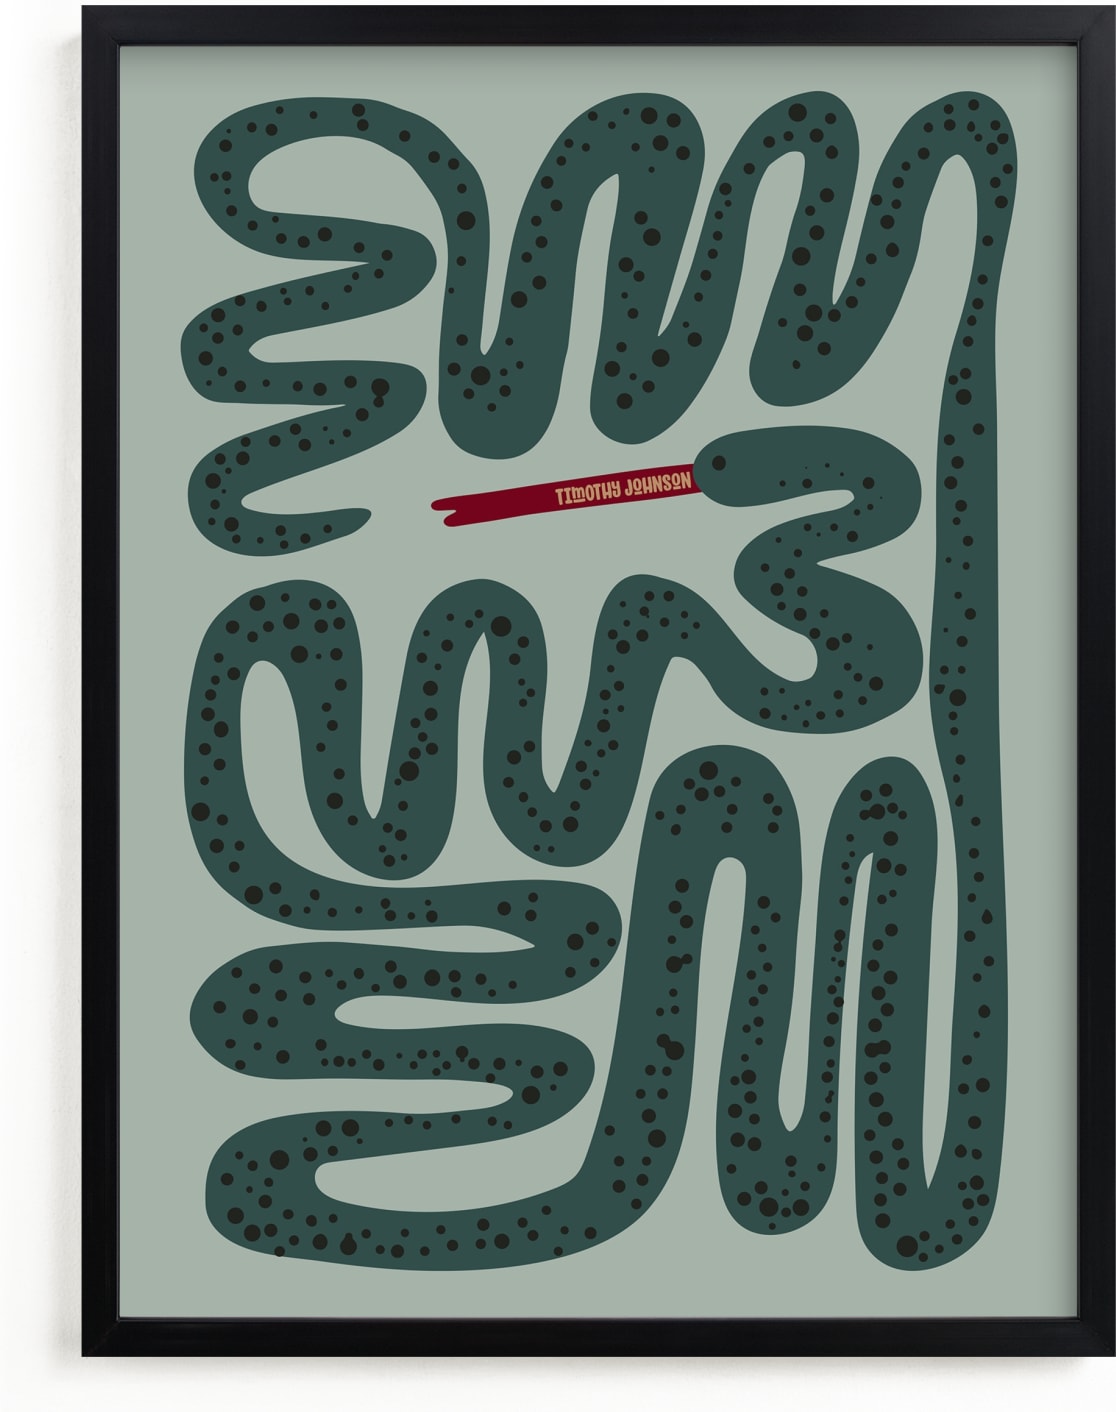 This is a black, green personalized art for kid by Jenna Holcomb called Squiggly Snake.